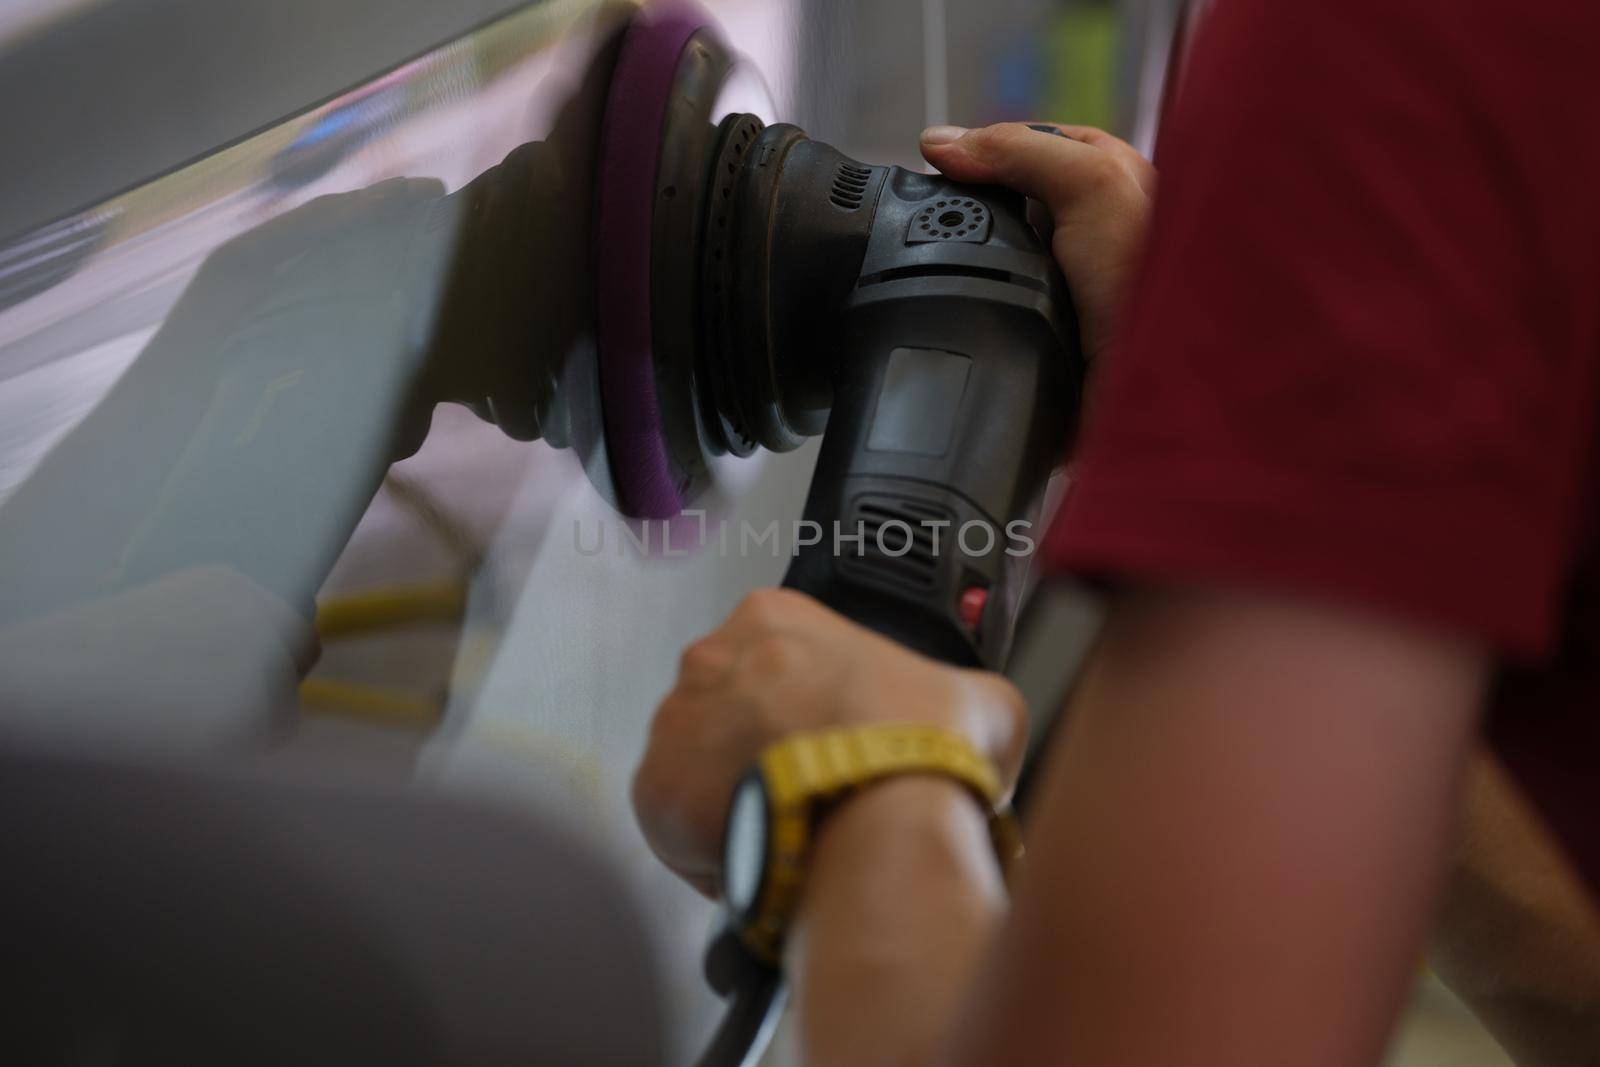 A repairman polishes a car body, close-up of a hand. Equipment for removing scratches, removing paint irregularities